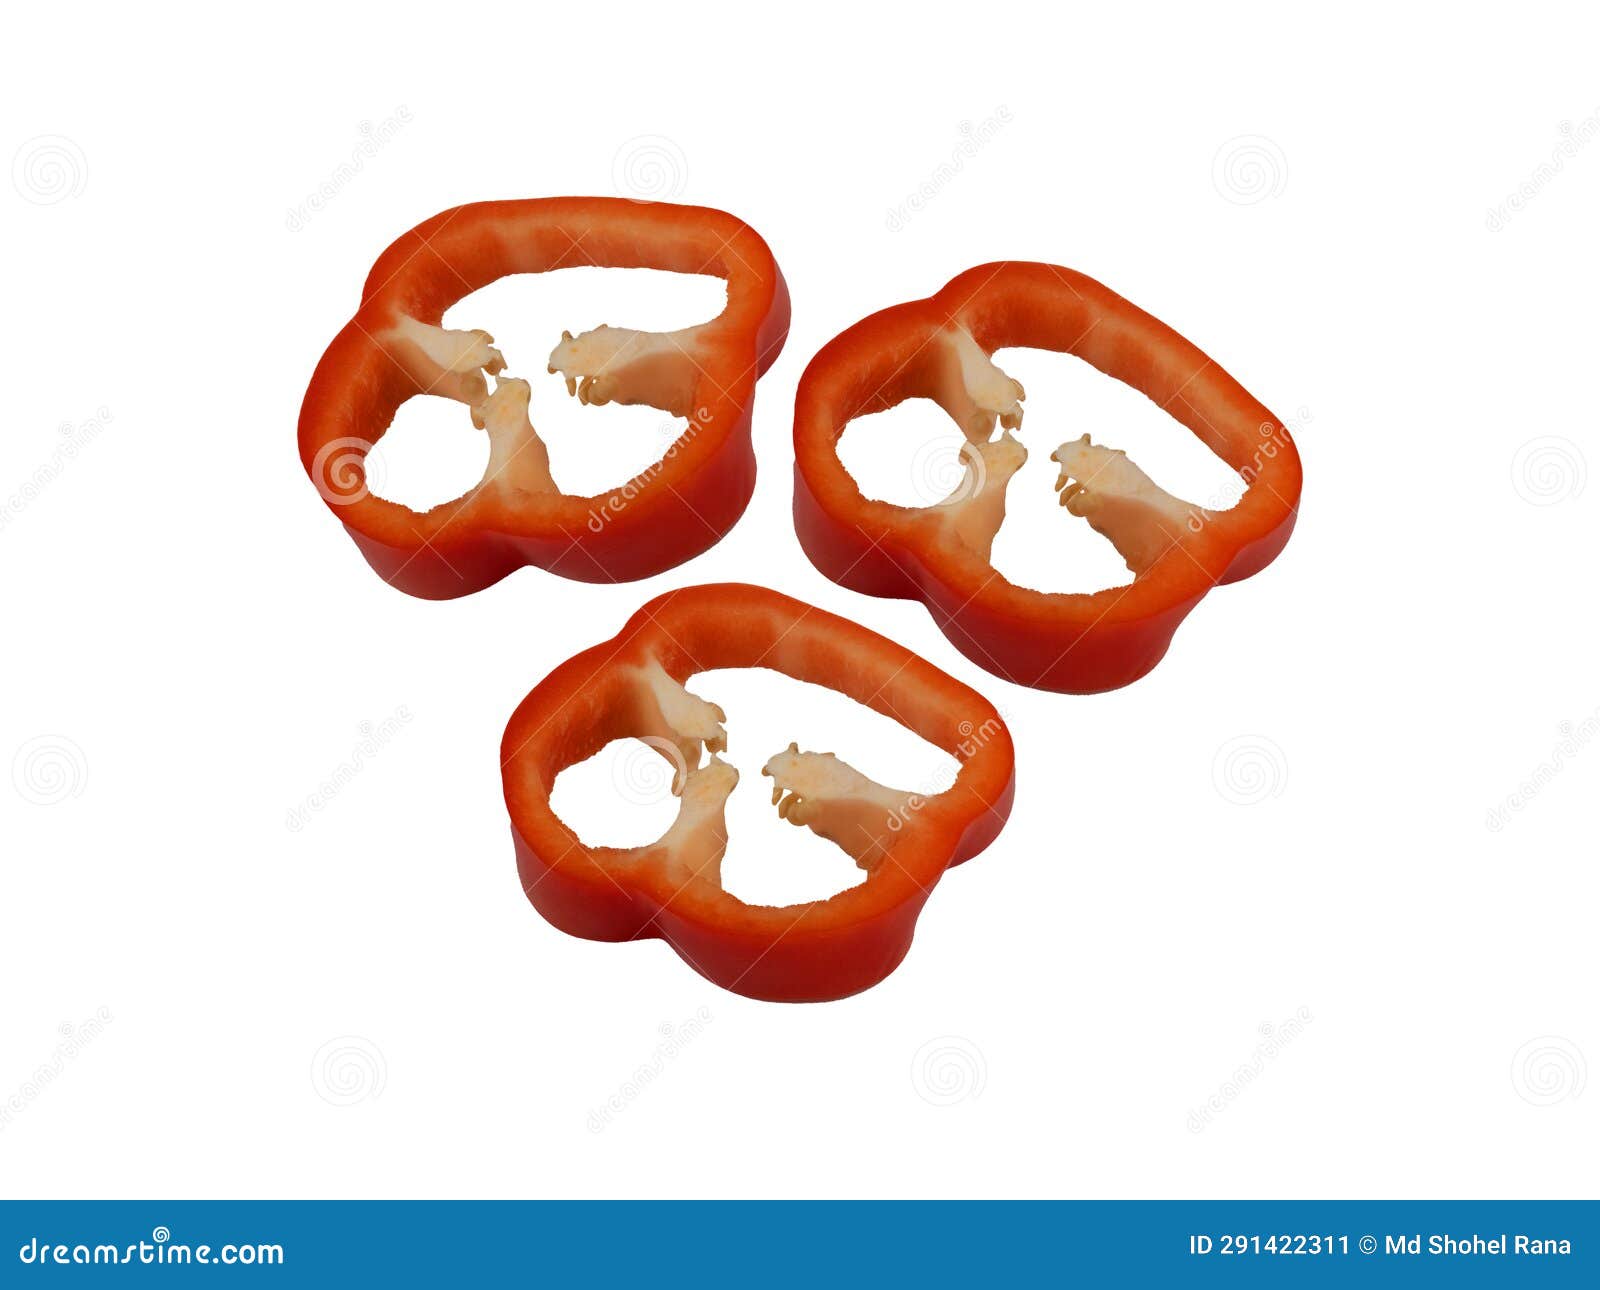 capsicum, slice fresh capsicum, slice capsicum for you